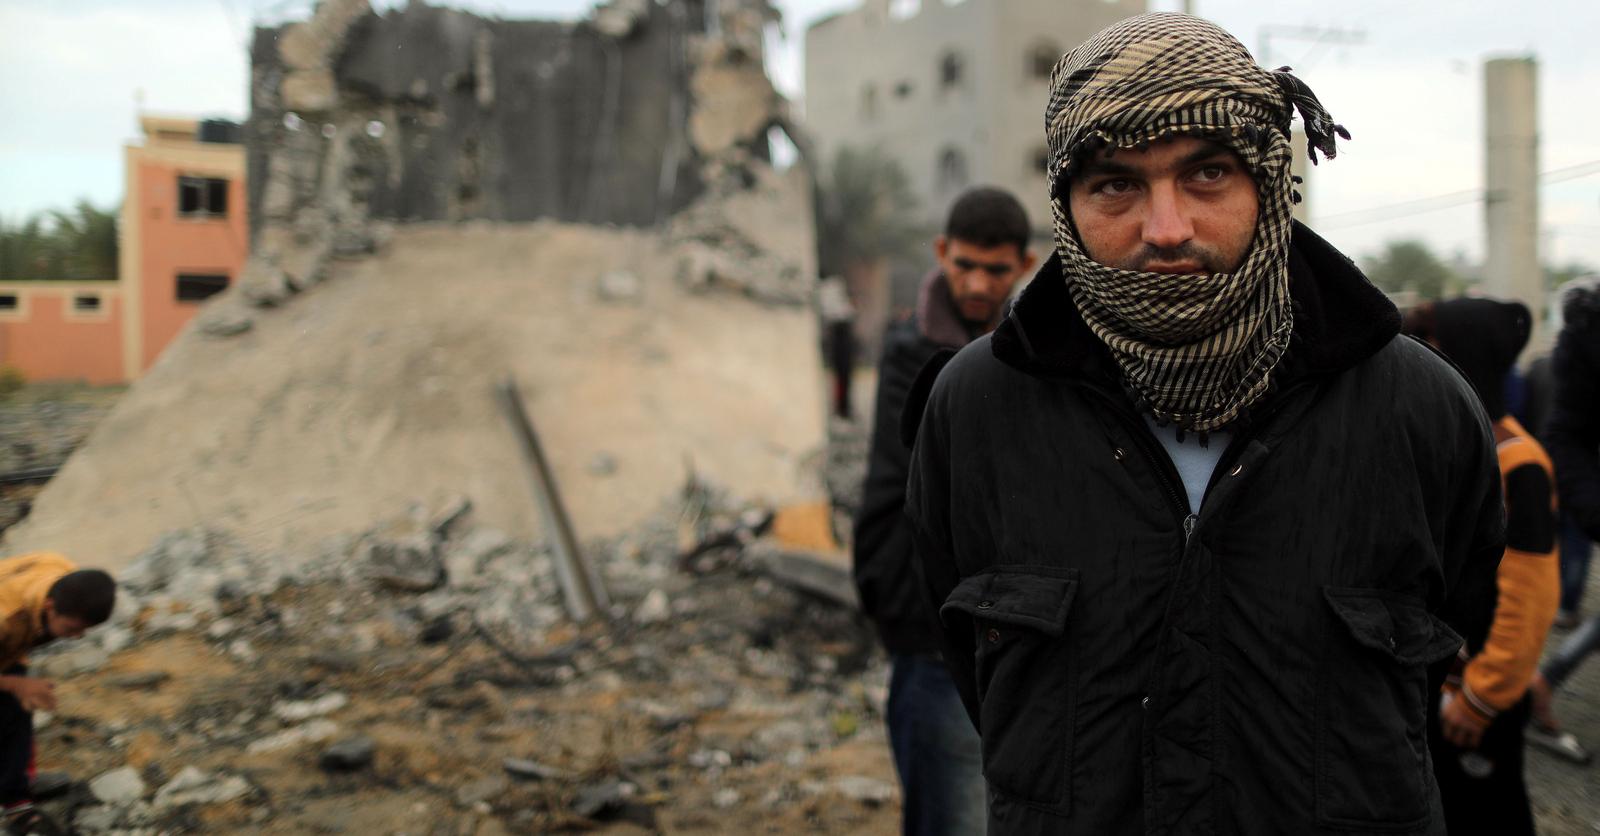 A Palestinian man wears a scarf and looks on as he stands in front of a building that was destroyed by an Israeli air strike. 